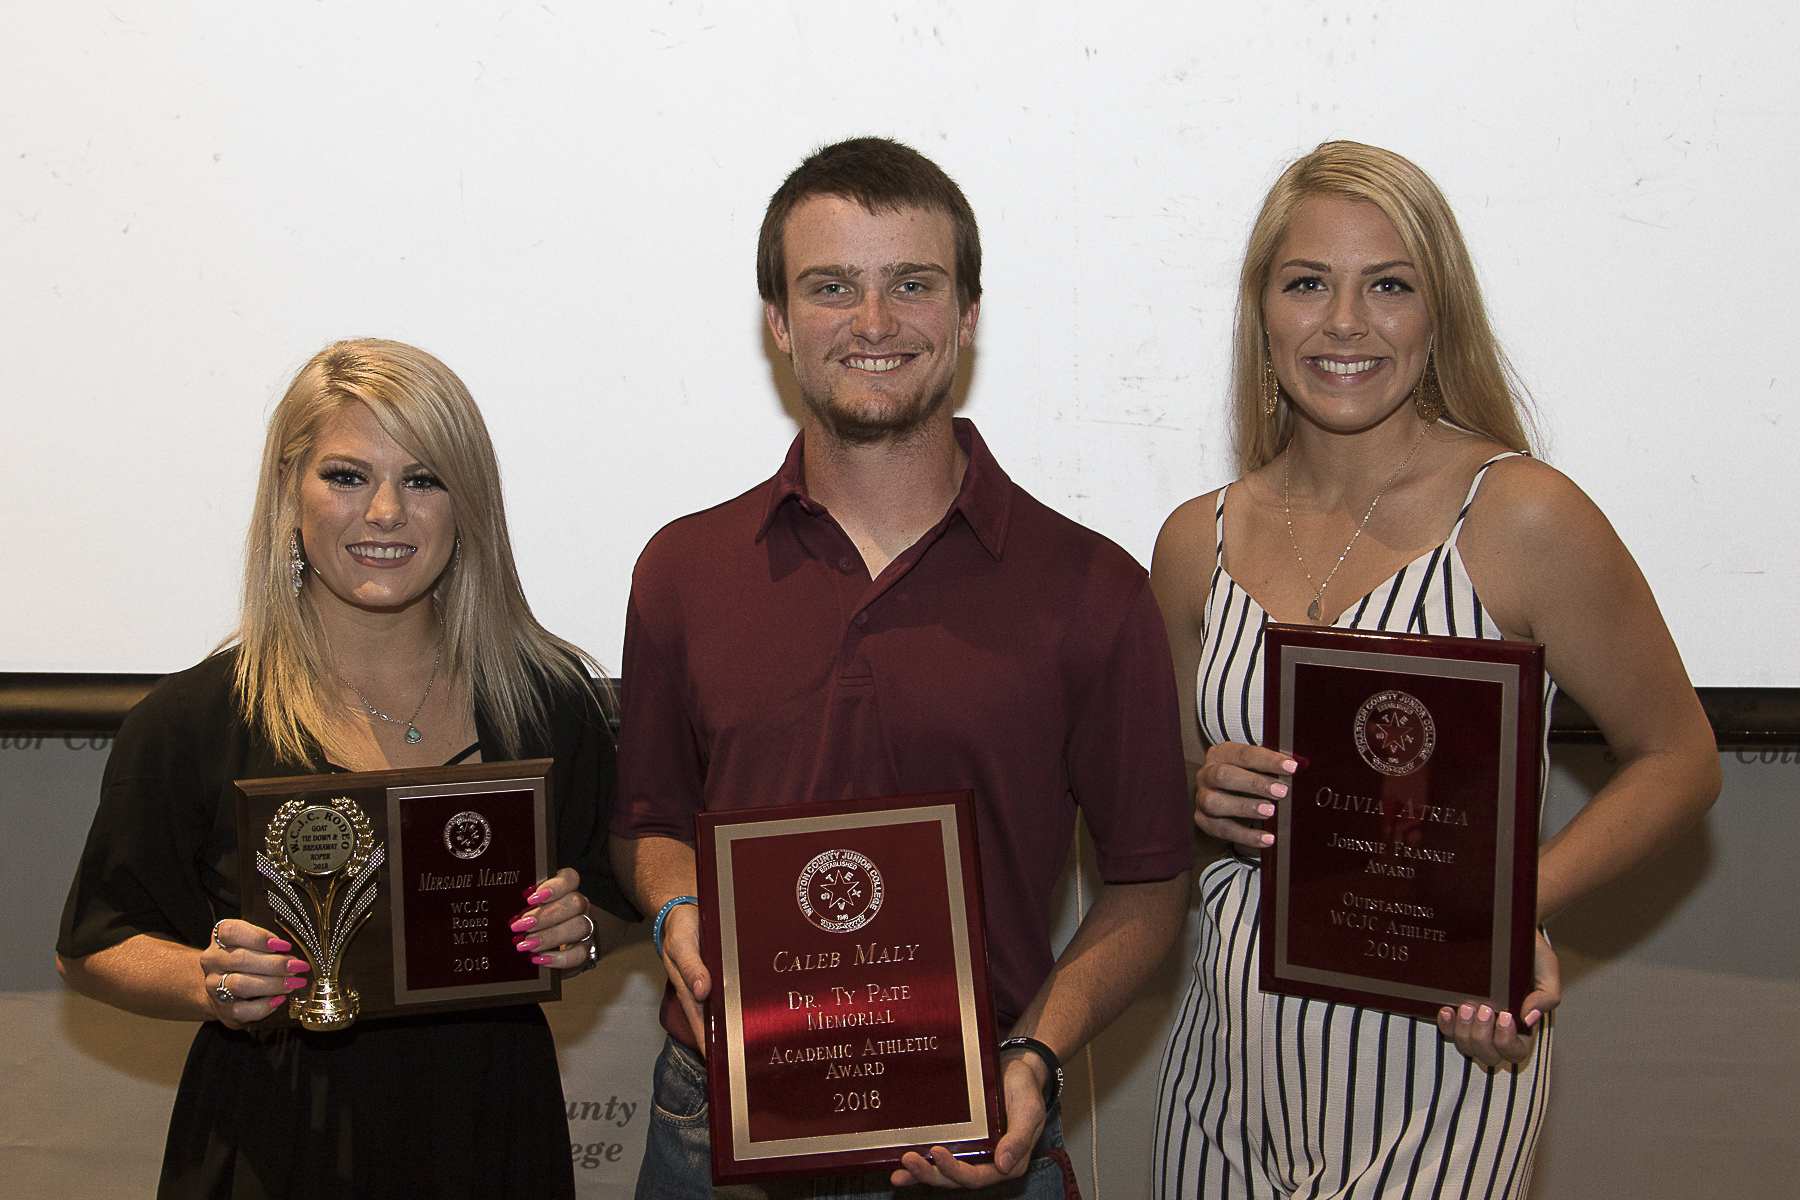 ATHLETIC ACHIEVEMENT WCJC recognizes outstanding student athletes at annual banquet